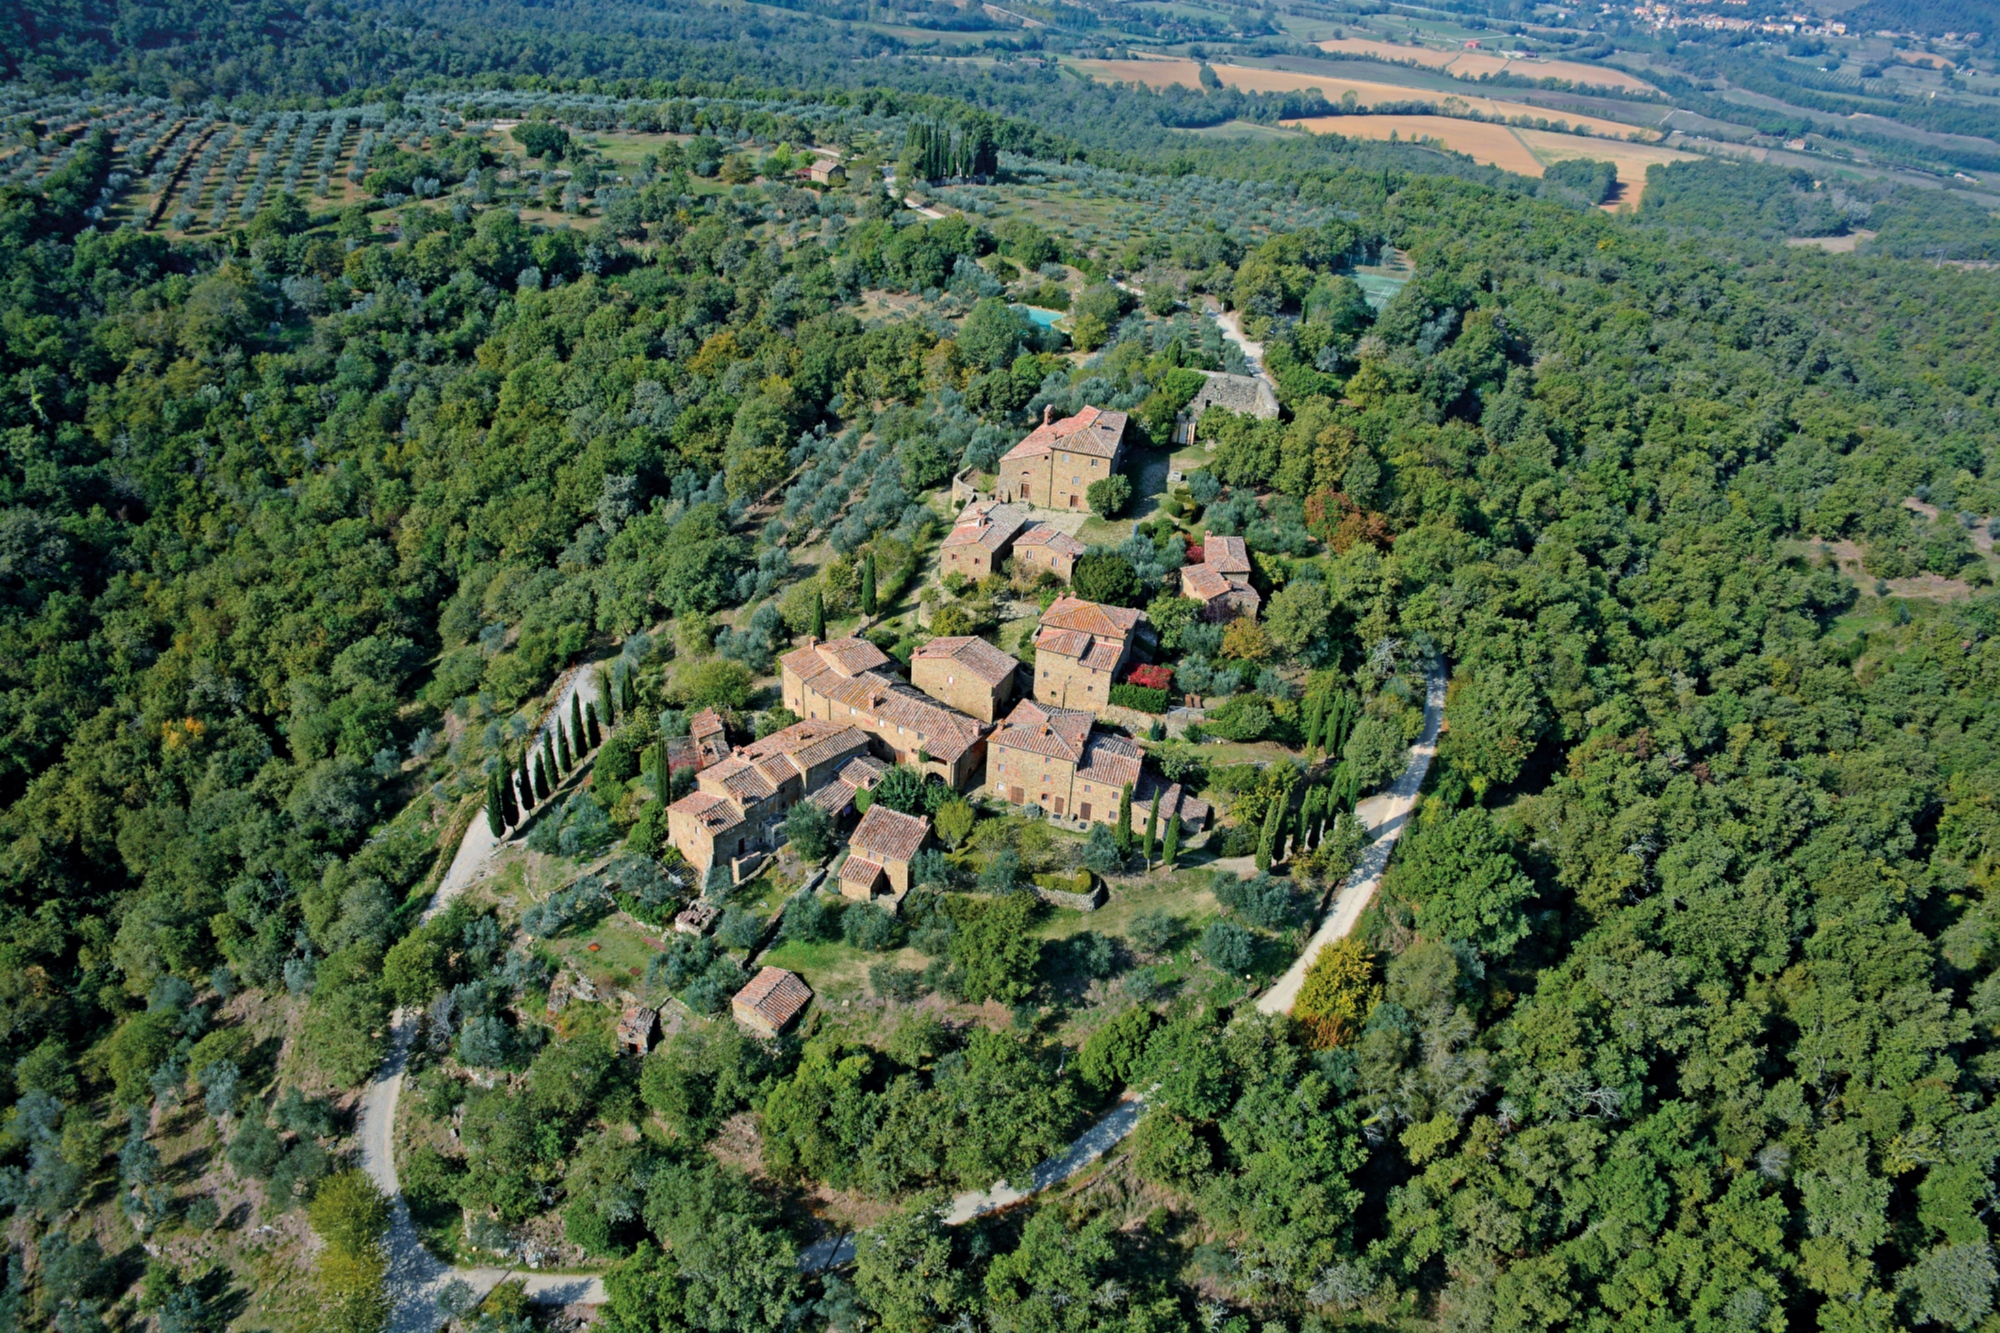 The village of Sogna from above